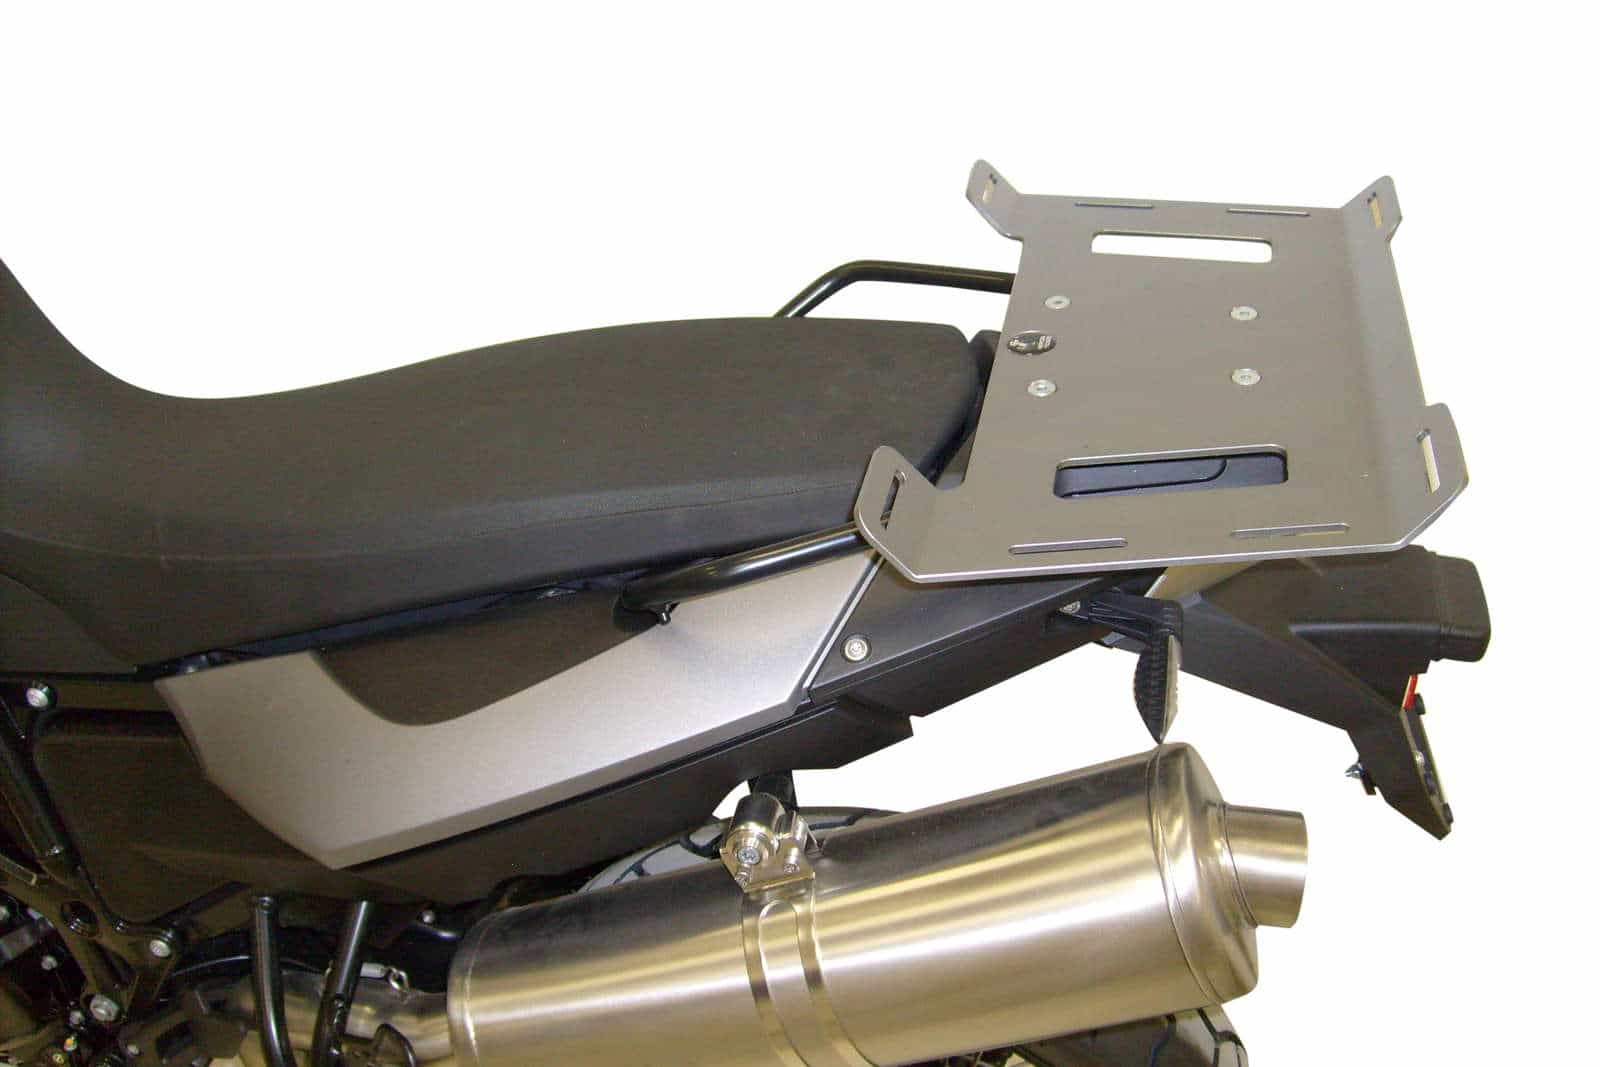 Modelspecific rear enlargement for BMW F 650 GS Twin (2008-2011)/F 700 GS (2012-2017)/F 800 GS (2008-2018)